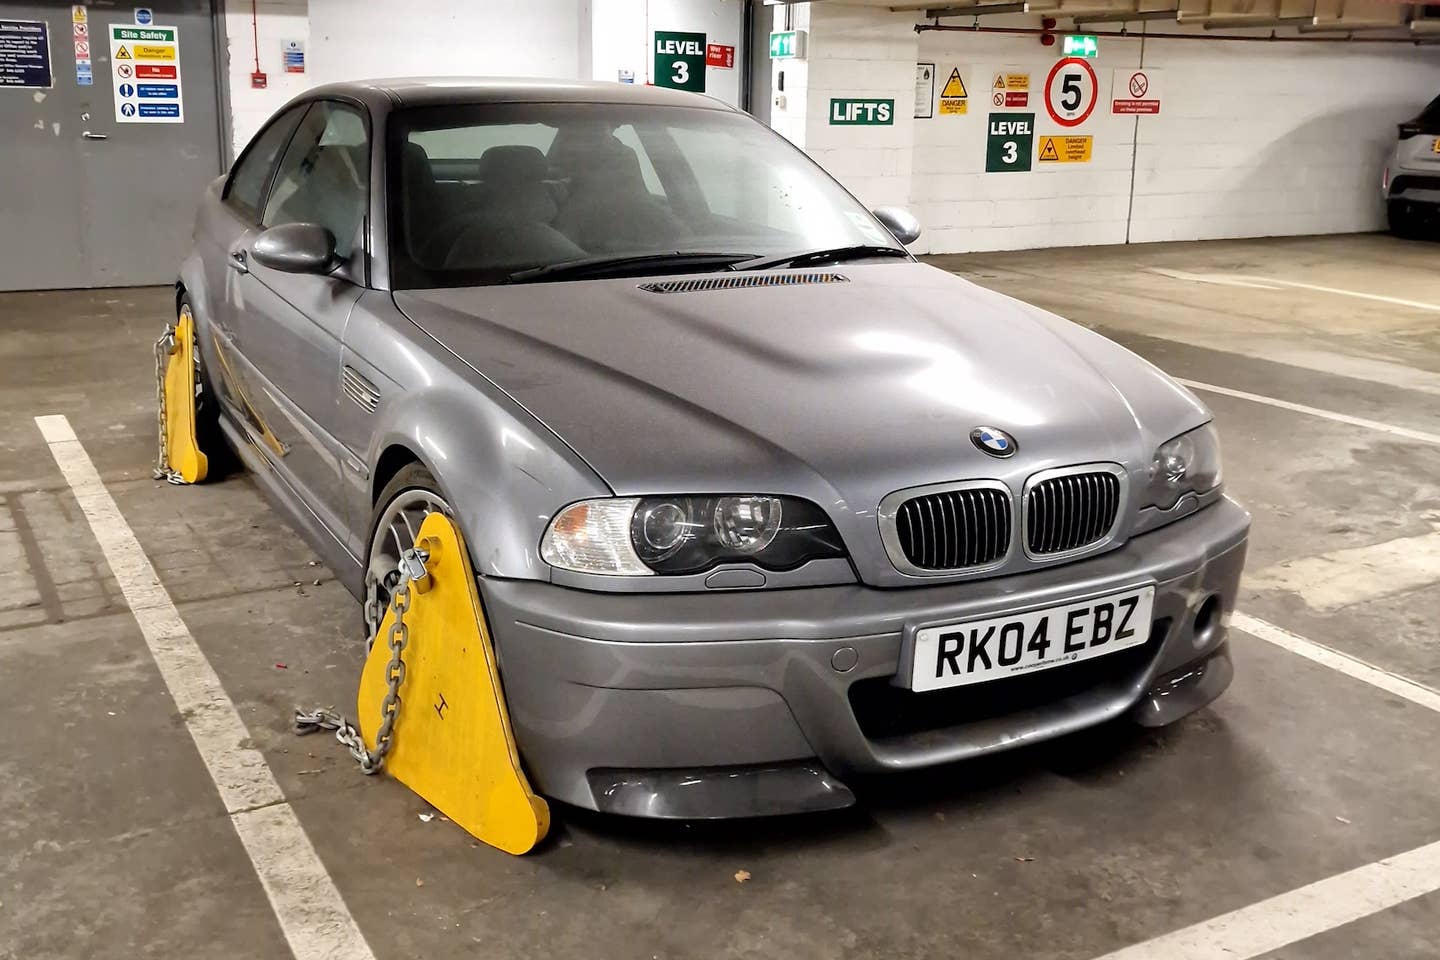 2004 BMW M3 CSL neglected in a London parking garage